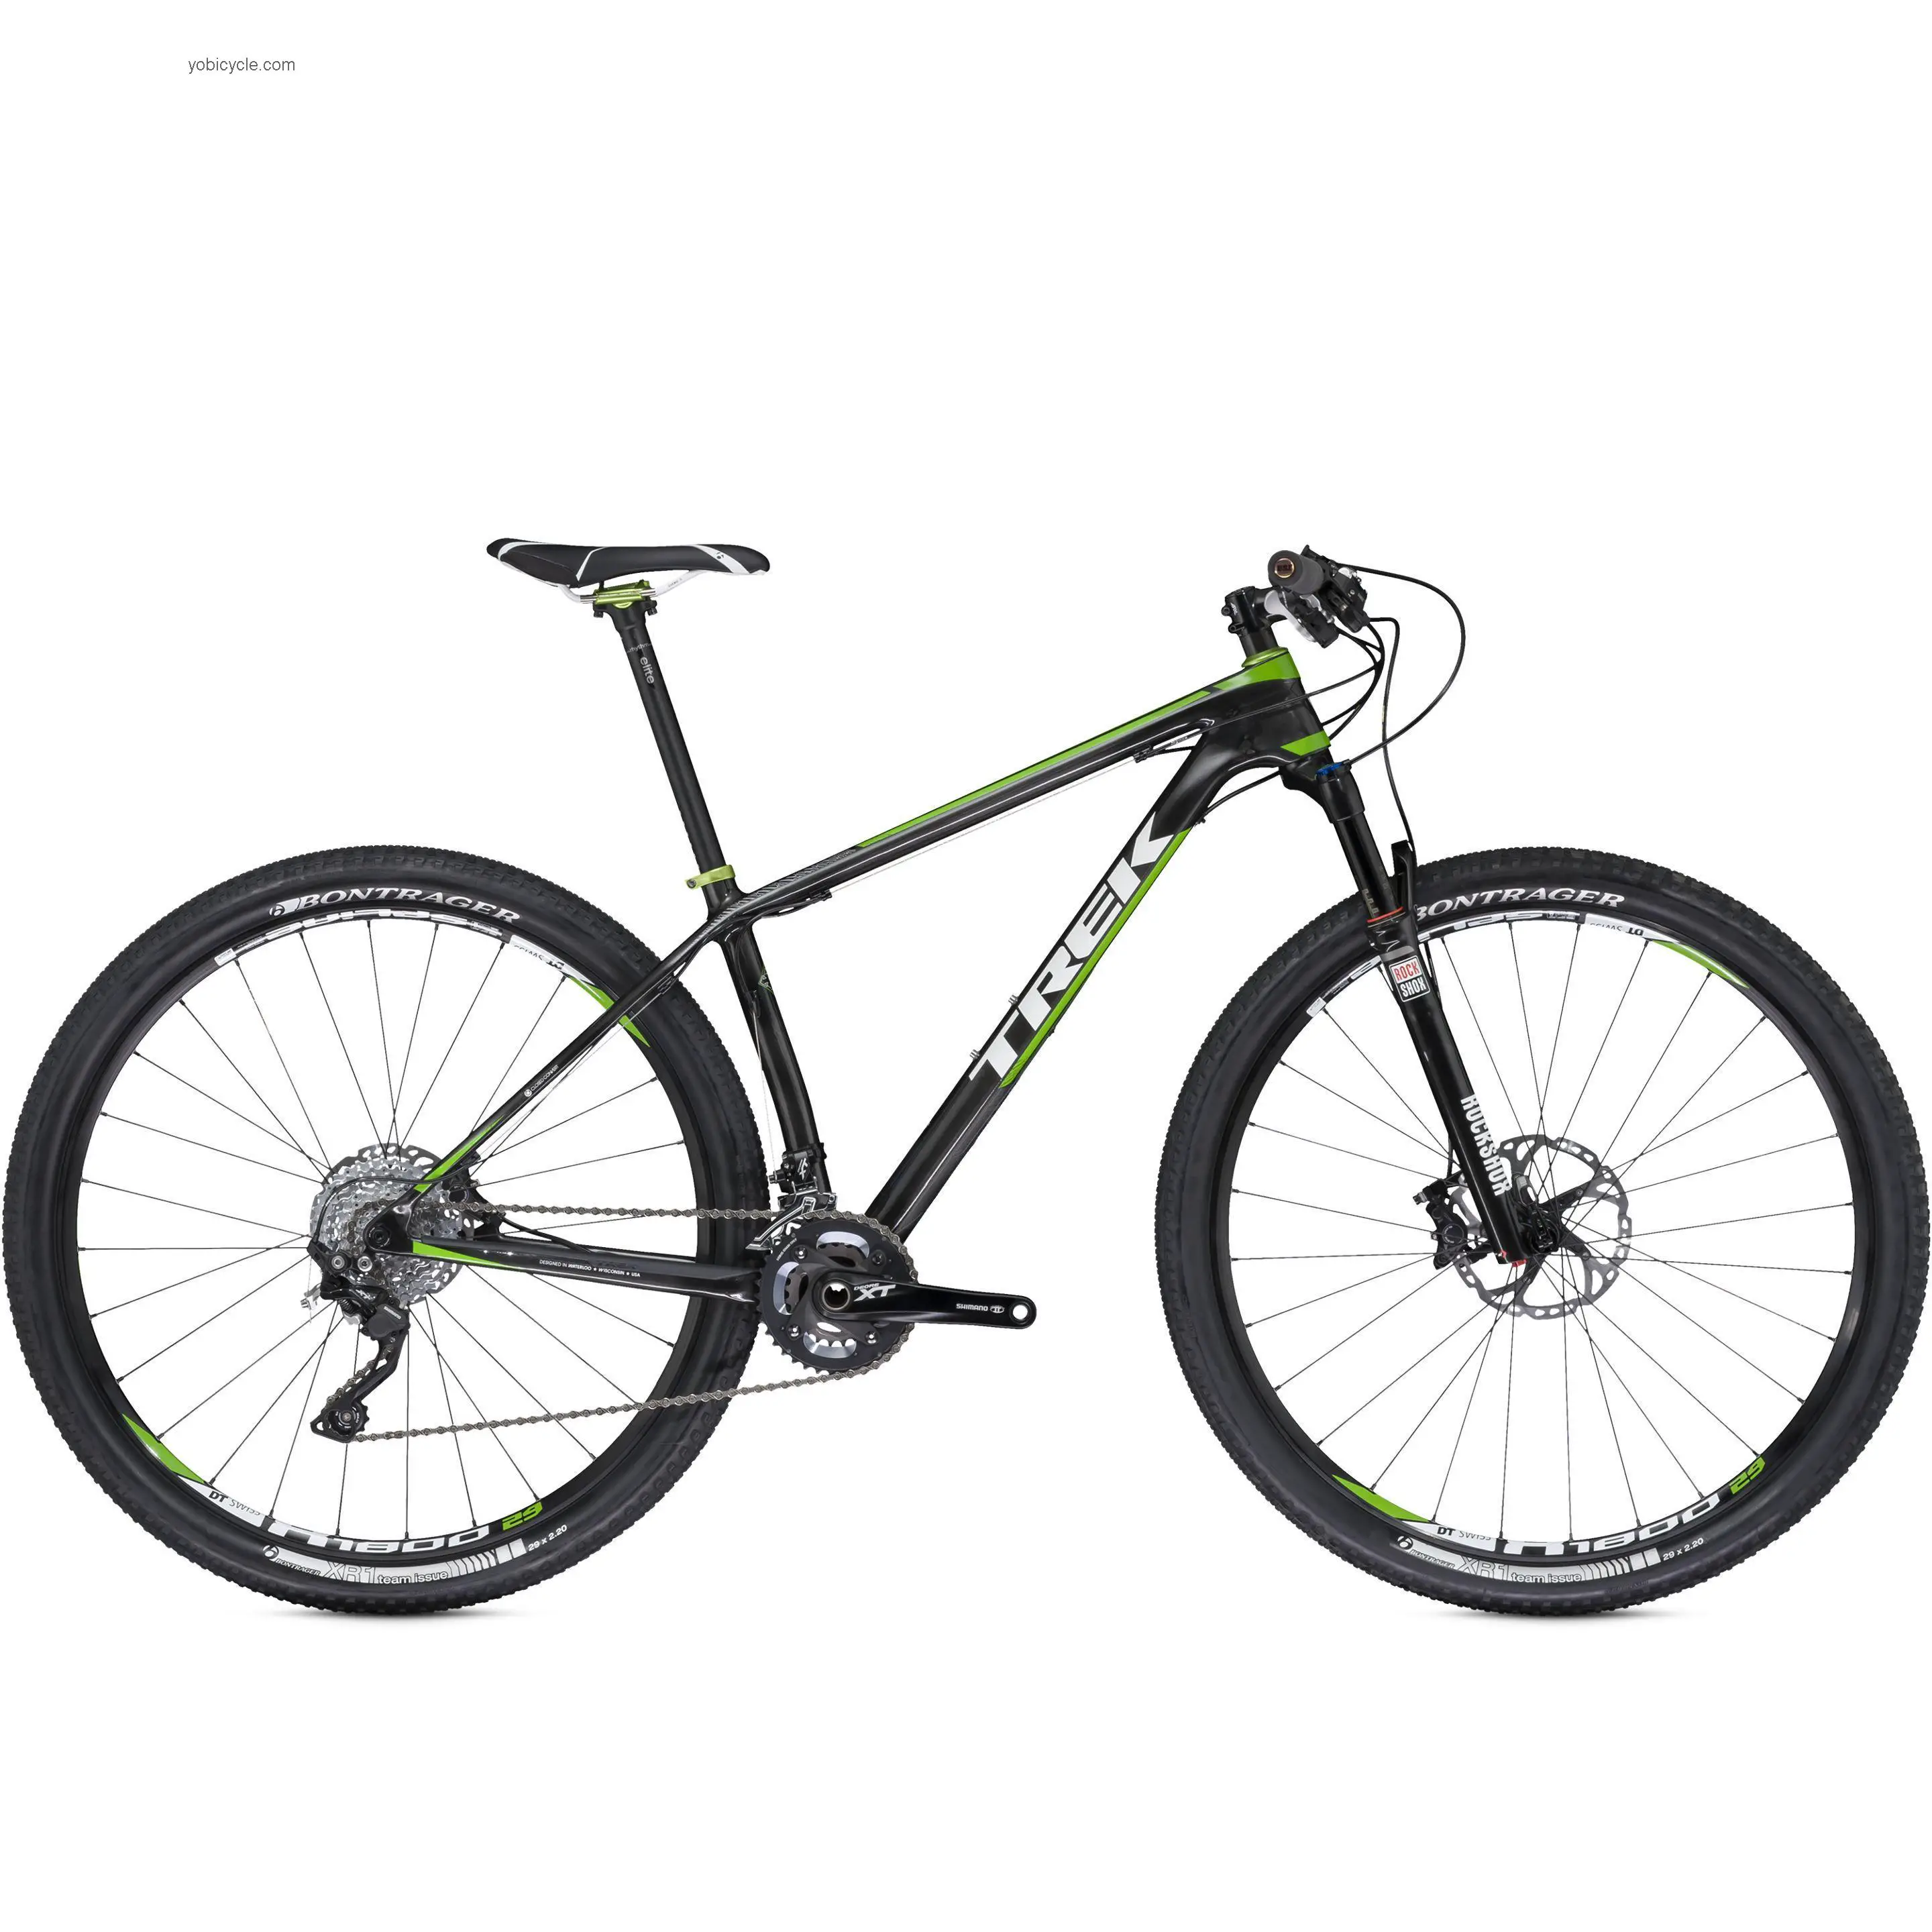 Trek Superfly 9.8 2014 comparison online with competitors